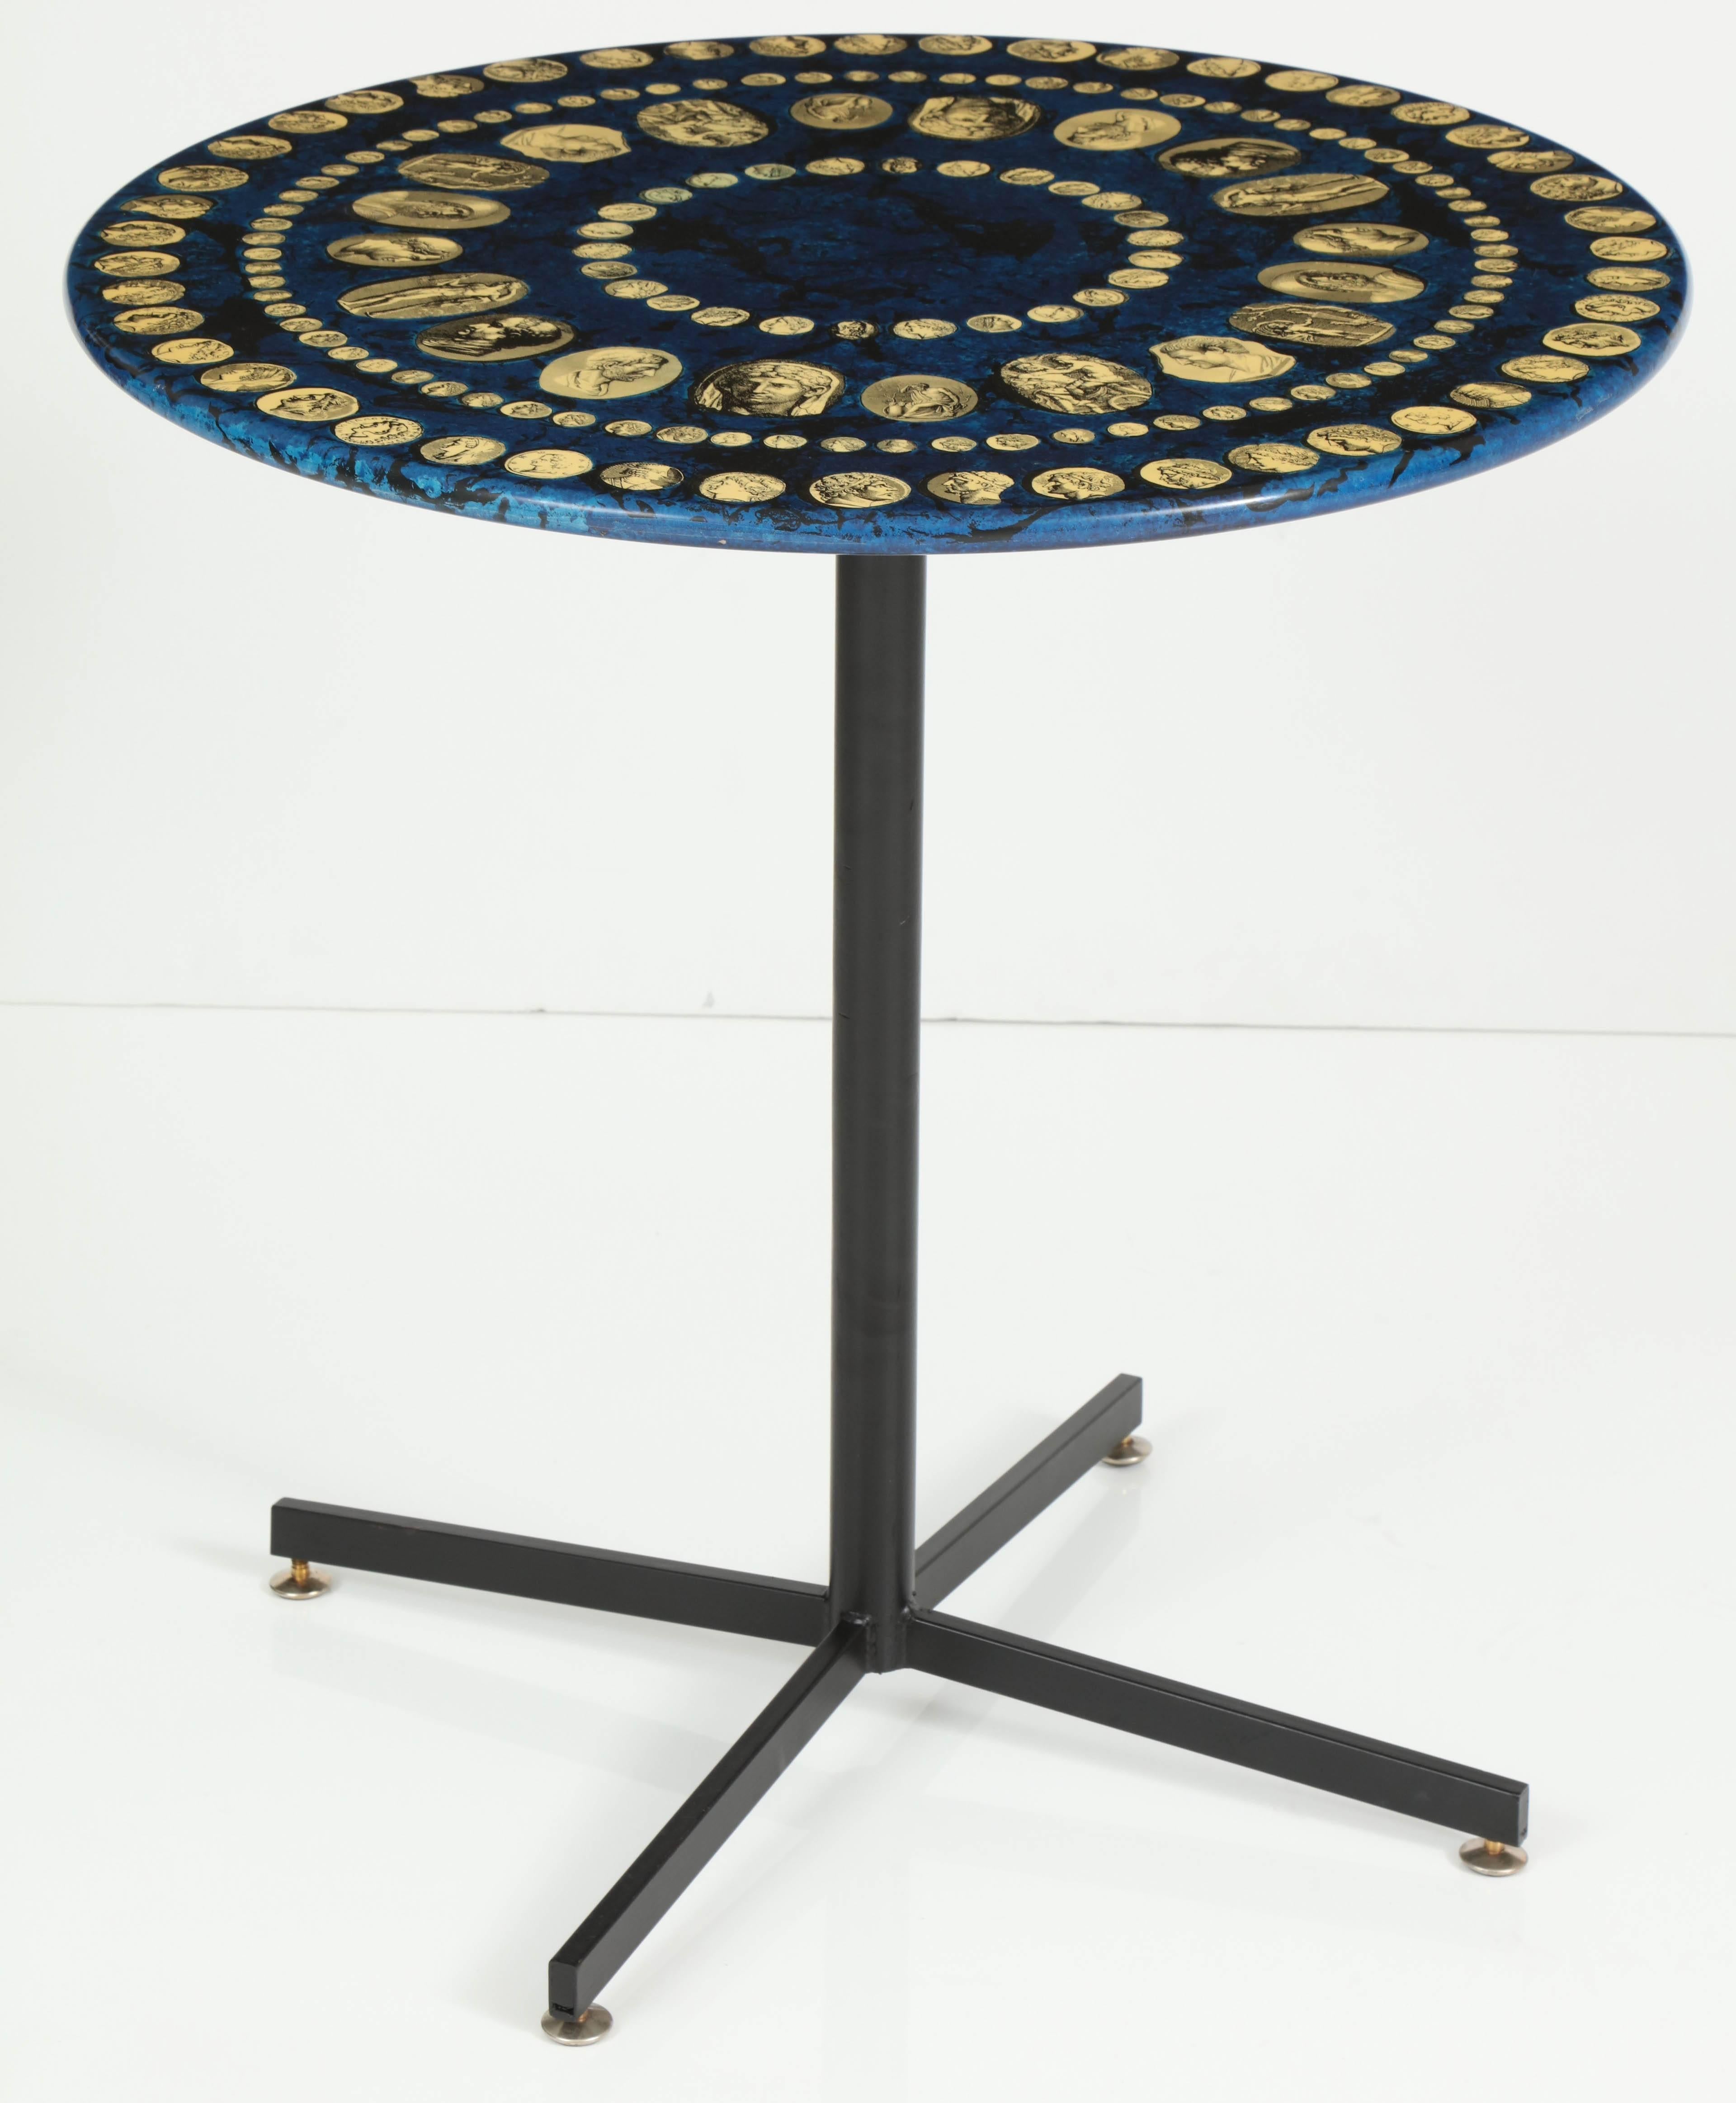 Although relatively small in size, this table makes a grand statement. Produced as part of the Cammei series in the 1950s, this same model was presented and published in the exposition La Folie Pratique at the Museum of Decorative Arts in Paris.